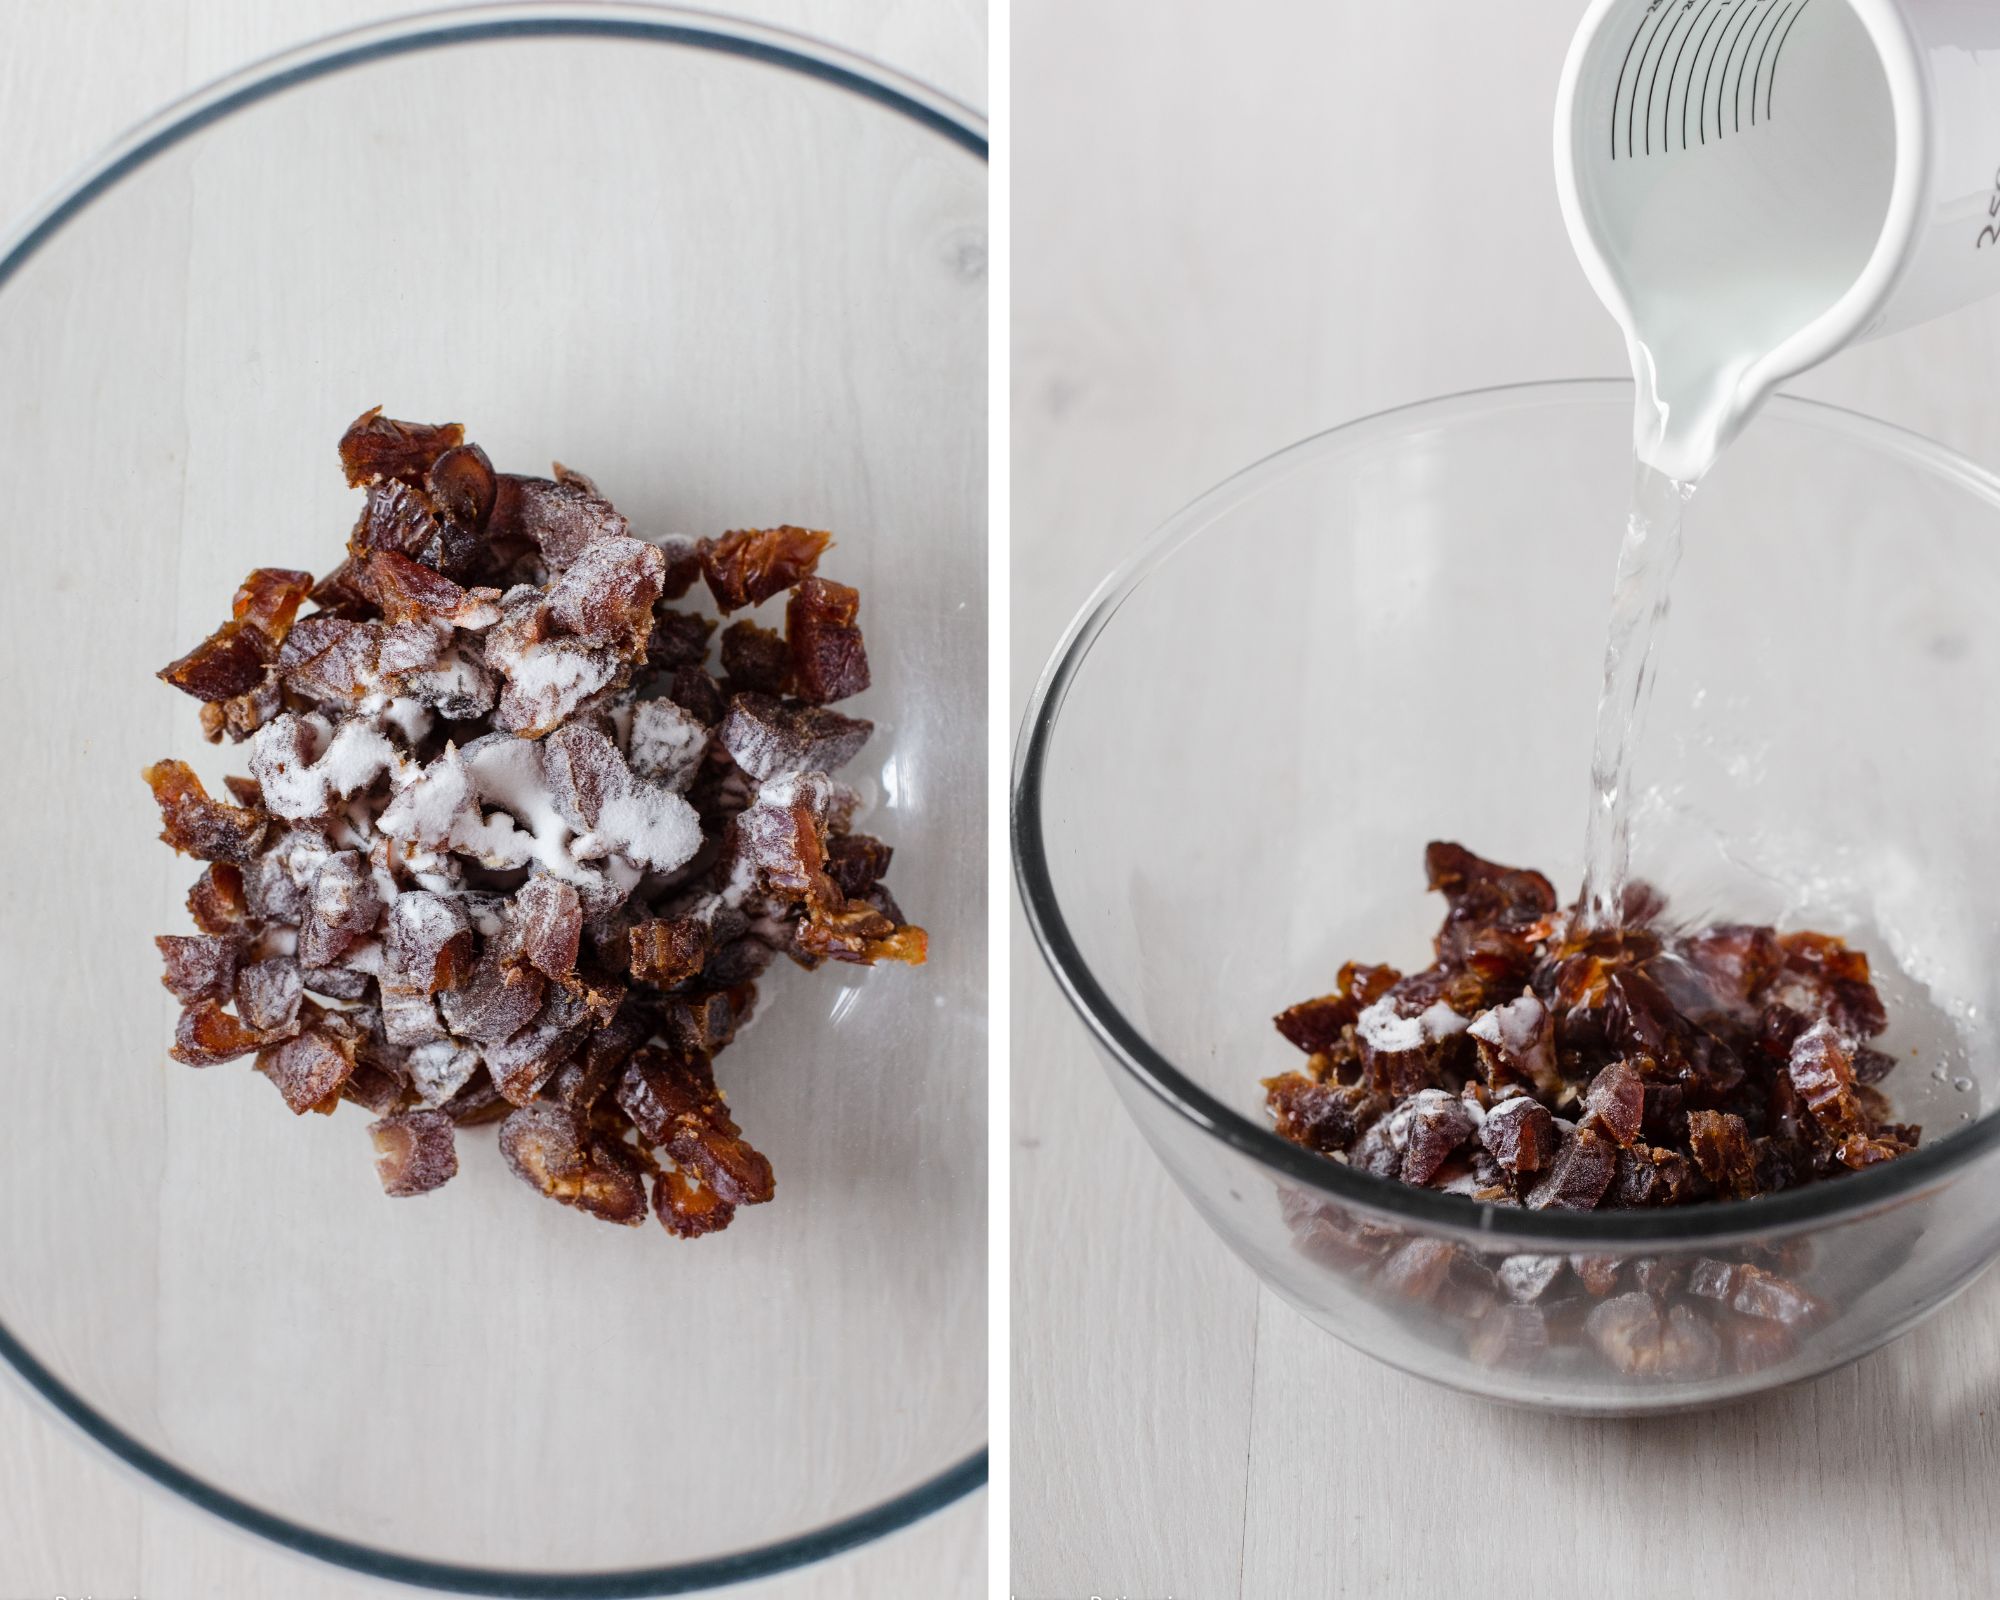 The chopped dates in a mixing bowl sprinkled with baking soda and pouring over the boiling water.